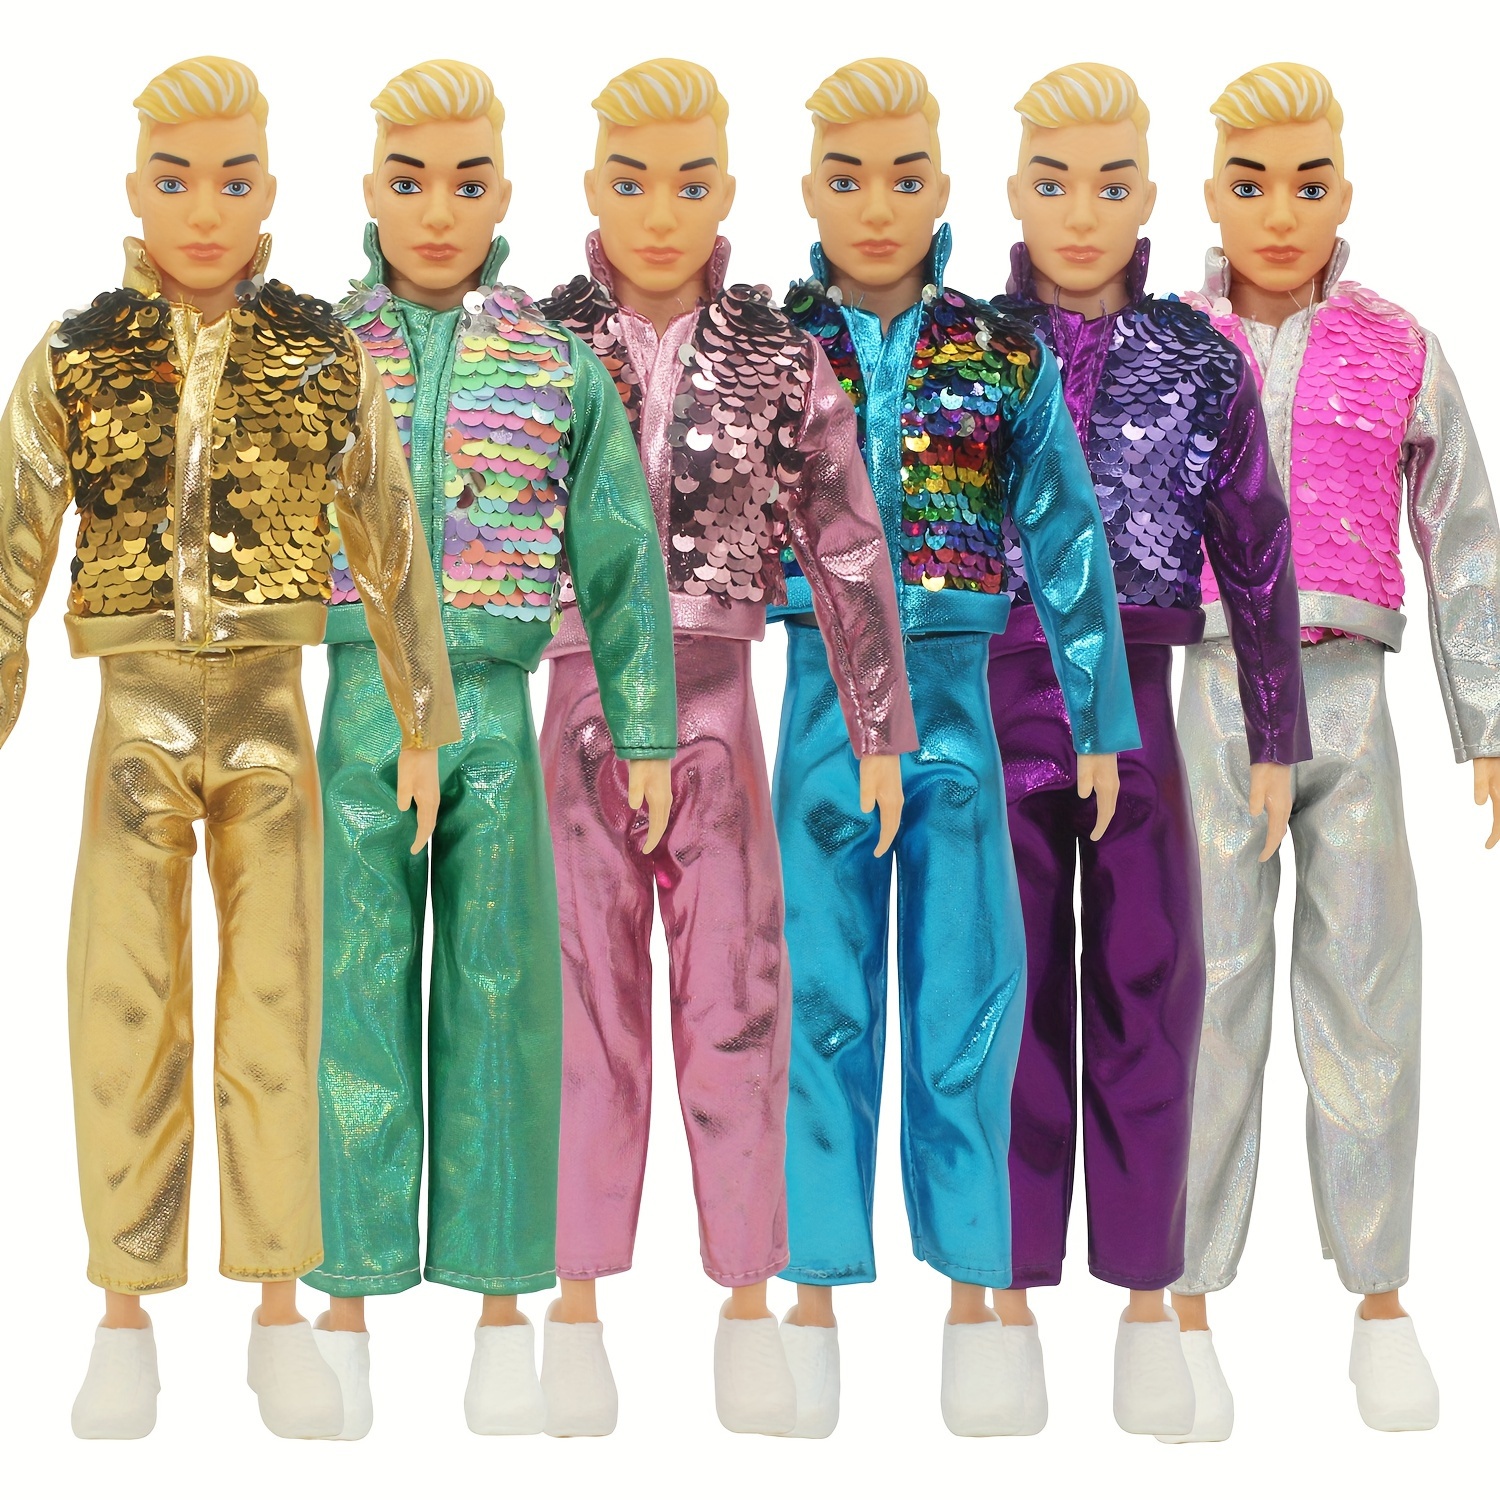 18 PCS Doll Clothes for Ken Doll Including Handmade 6 Tops 6 Pants Casual  Wear 2 Beach Pants 4 Pair of Shoes for 11.5 Inch Boy Doll Outfits for